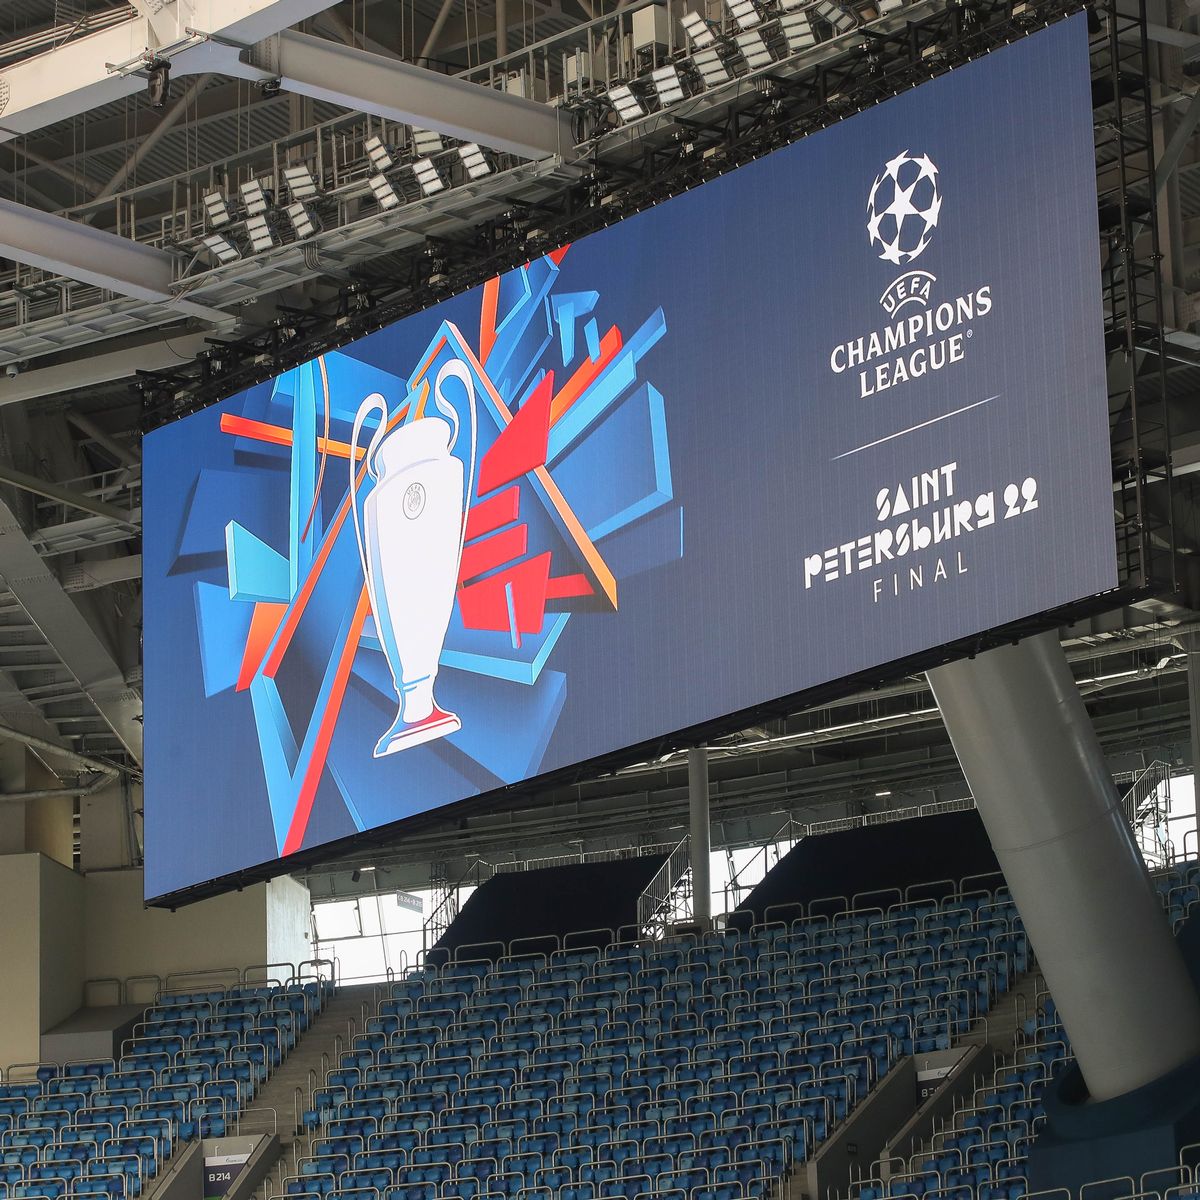 UEFA confirm new venue for Champions League final after stripping Russia